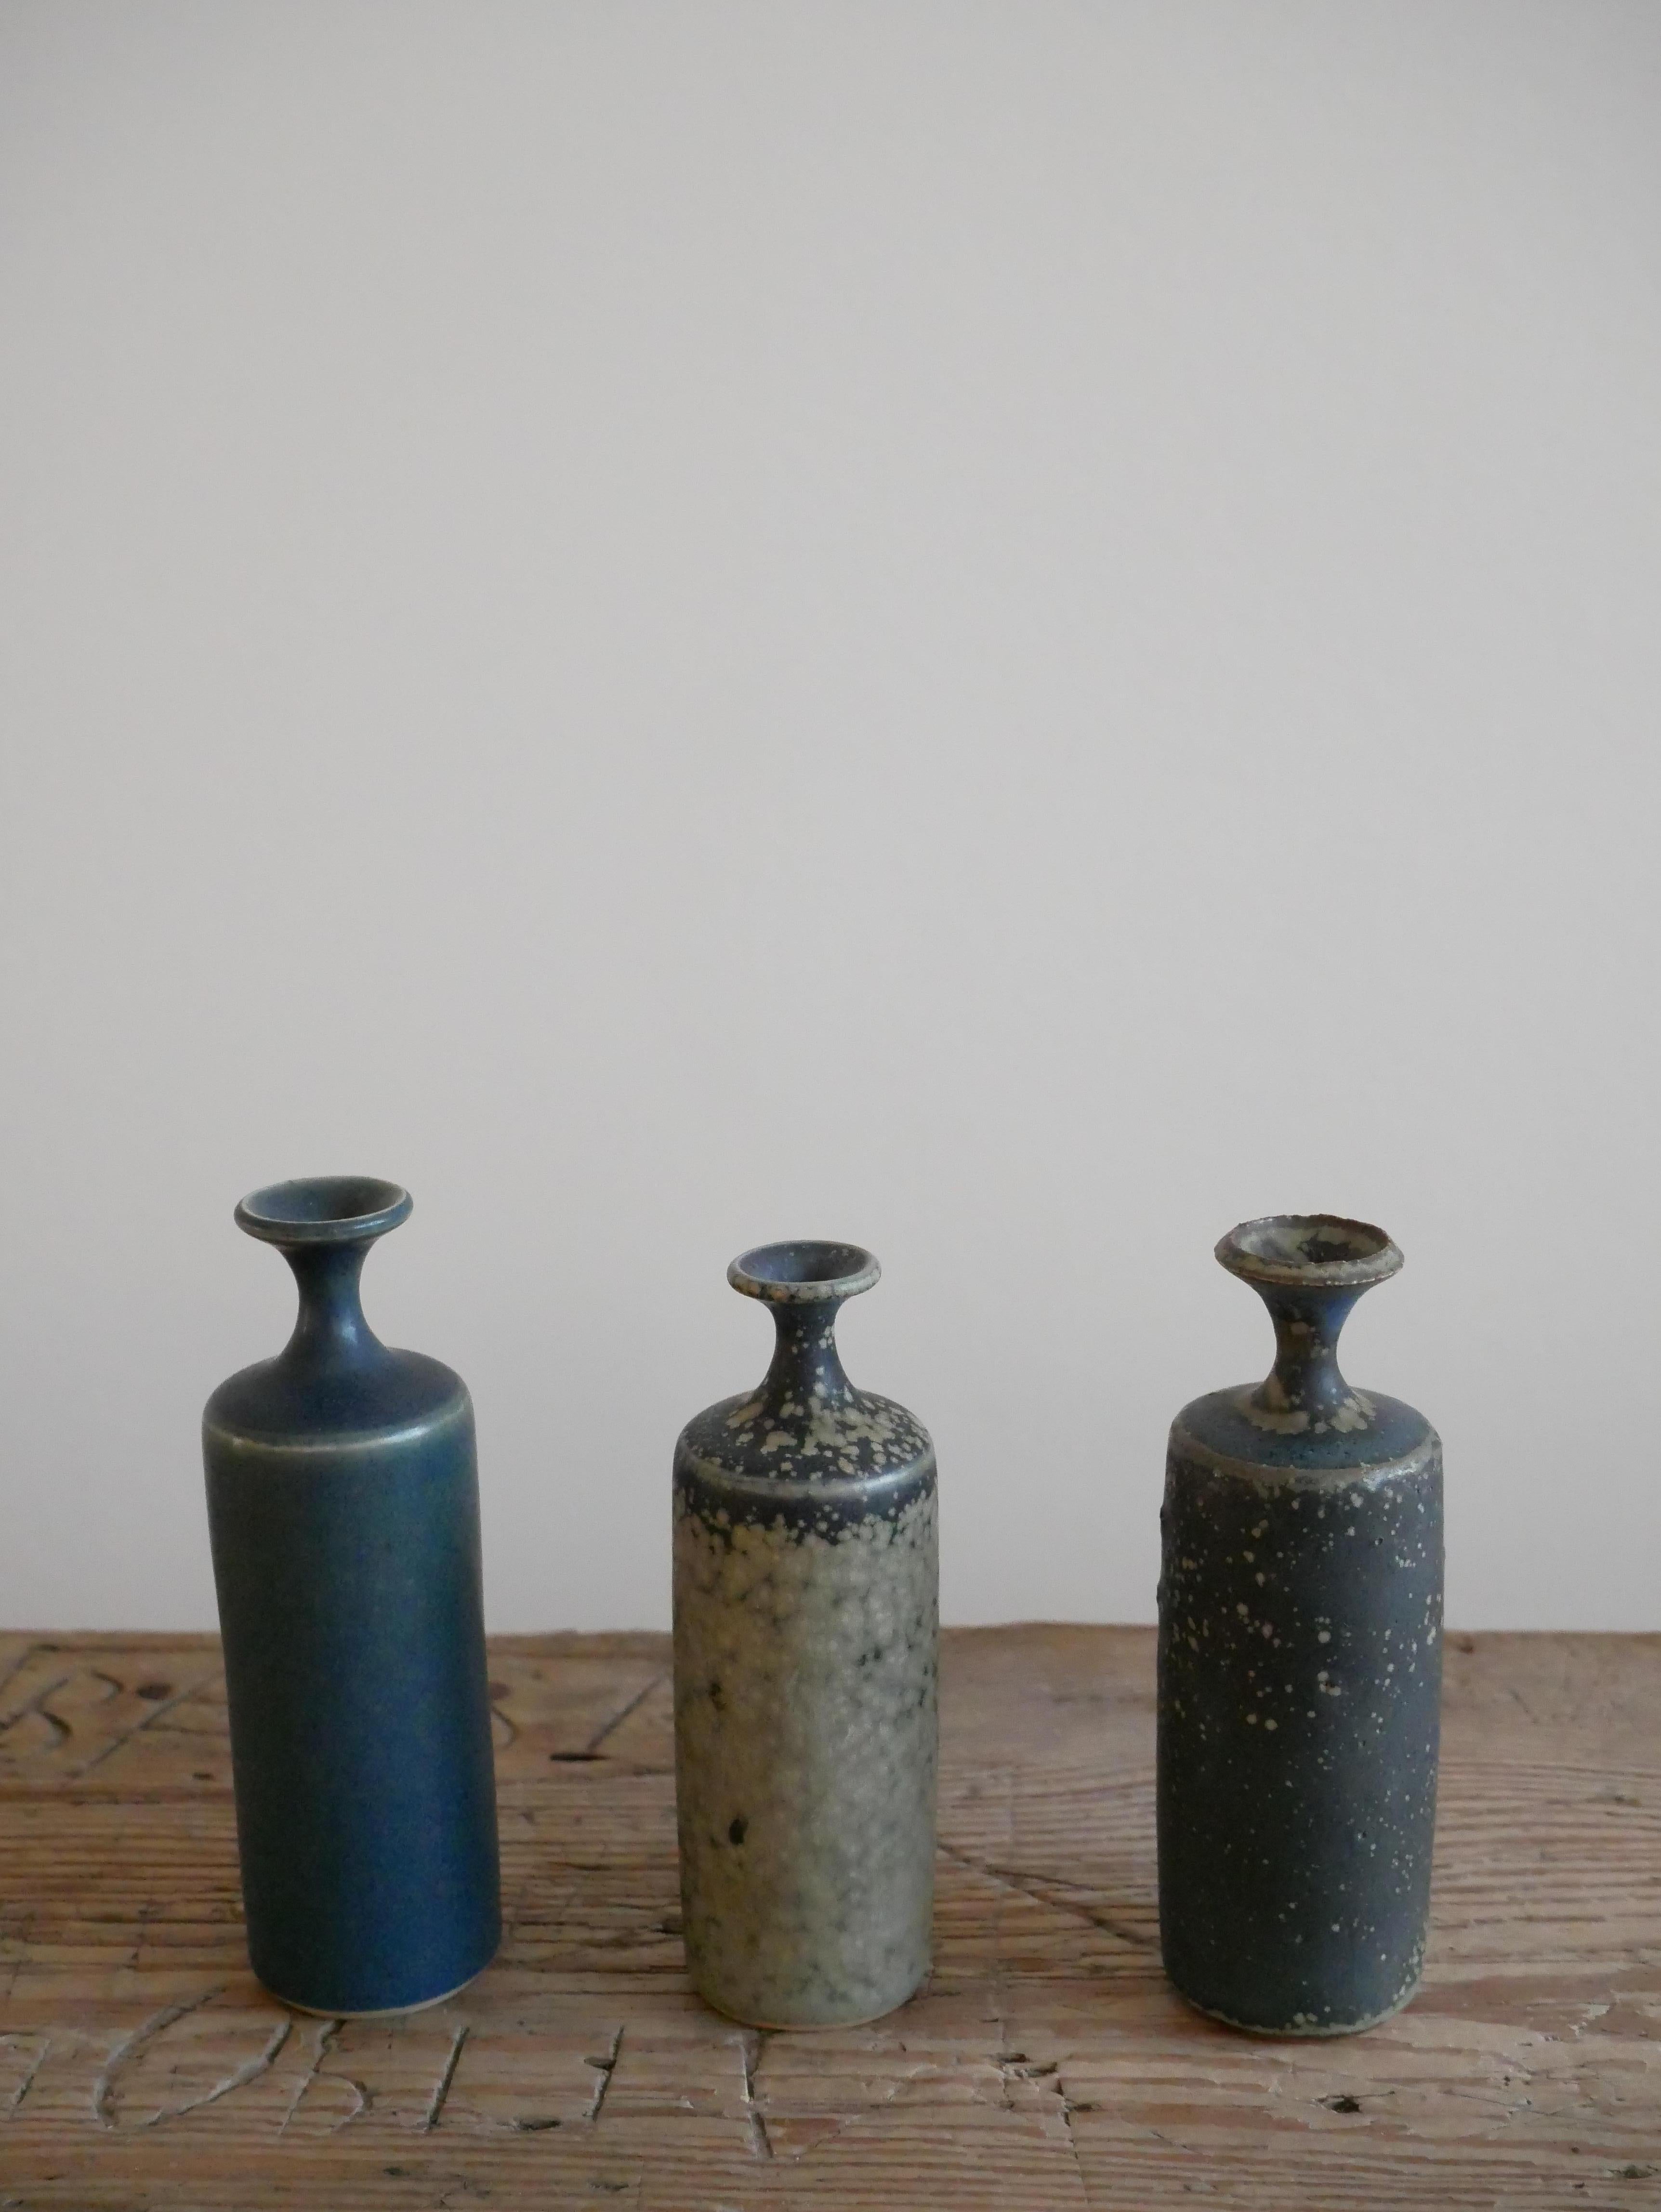 A set of three small vases with a lovely multicolored glaze designed by Rolf Palm, made at his workshop in Mölle outside Höganäs in Sweden. 
Rolf Palm was one of Swedens leading ceramicist artists of the 20th century. 
He was born in Höganäs and